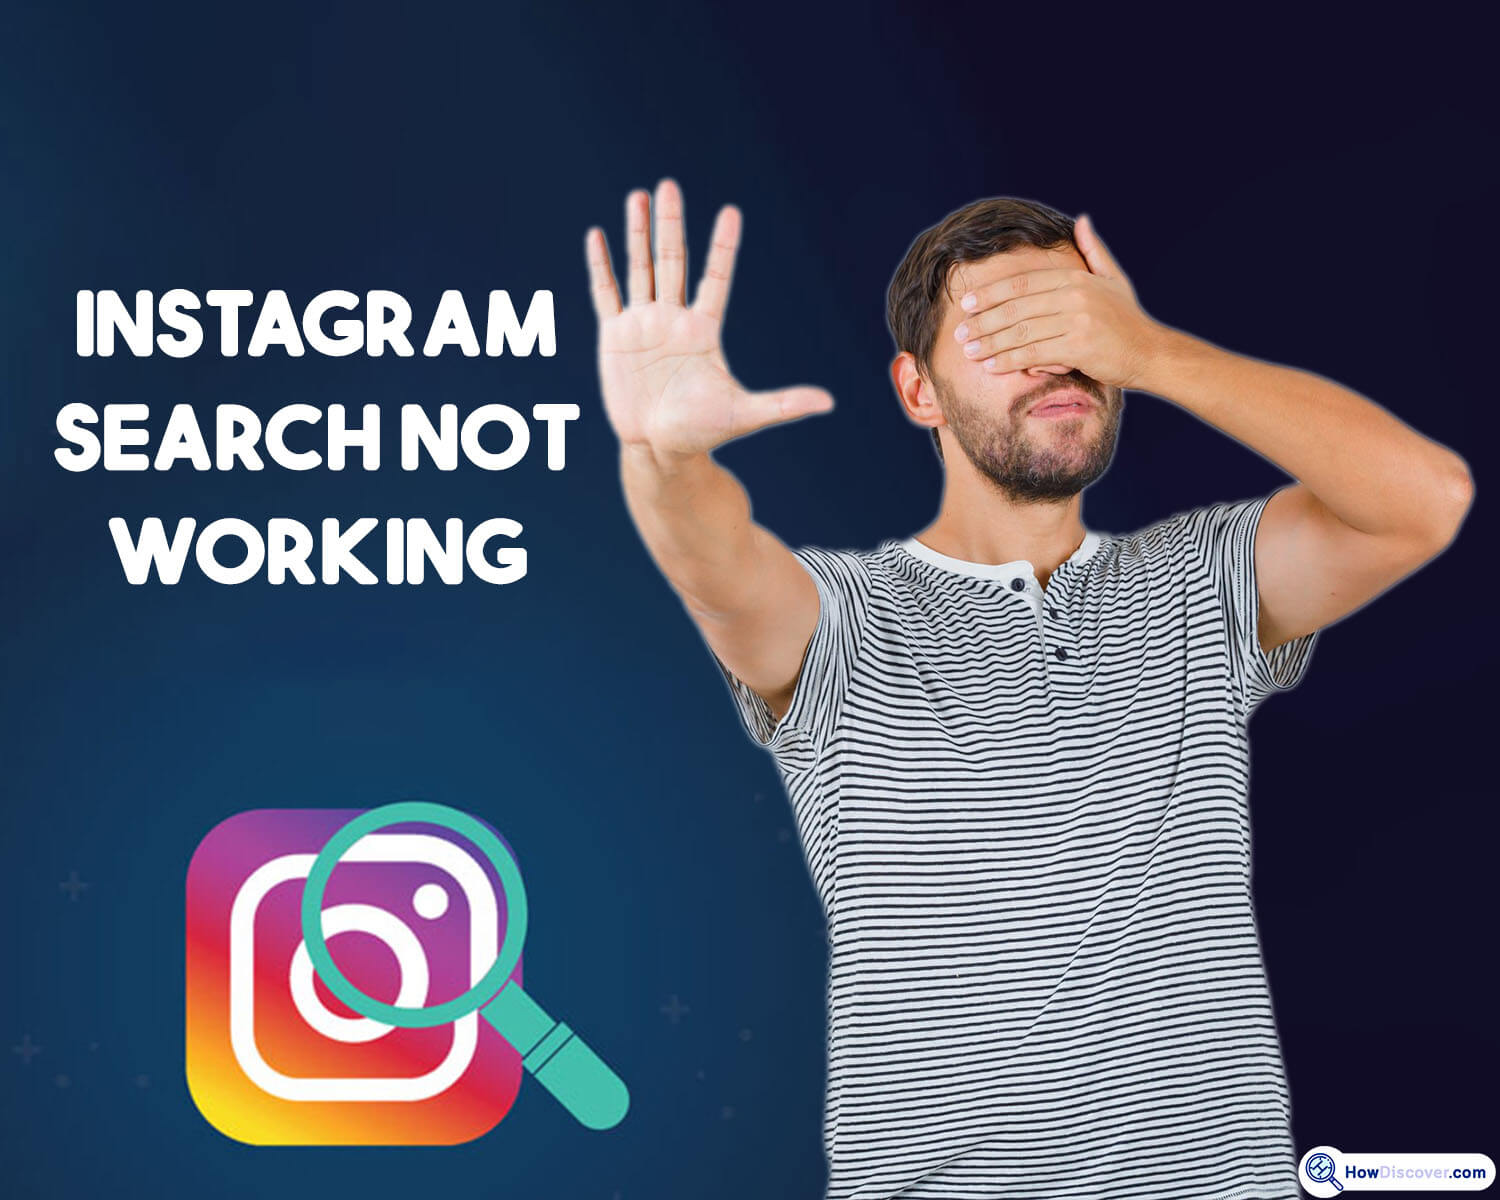 Instagram search not working